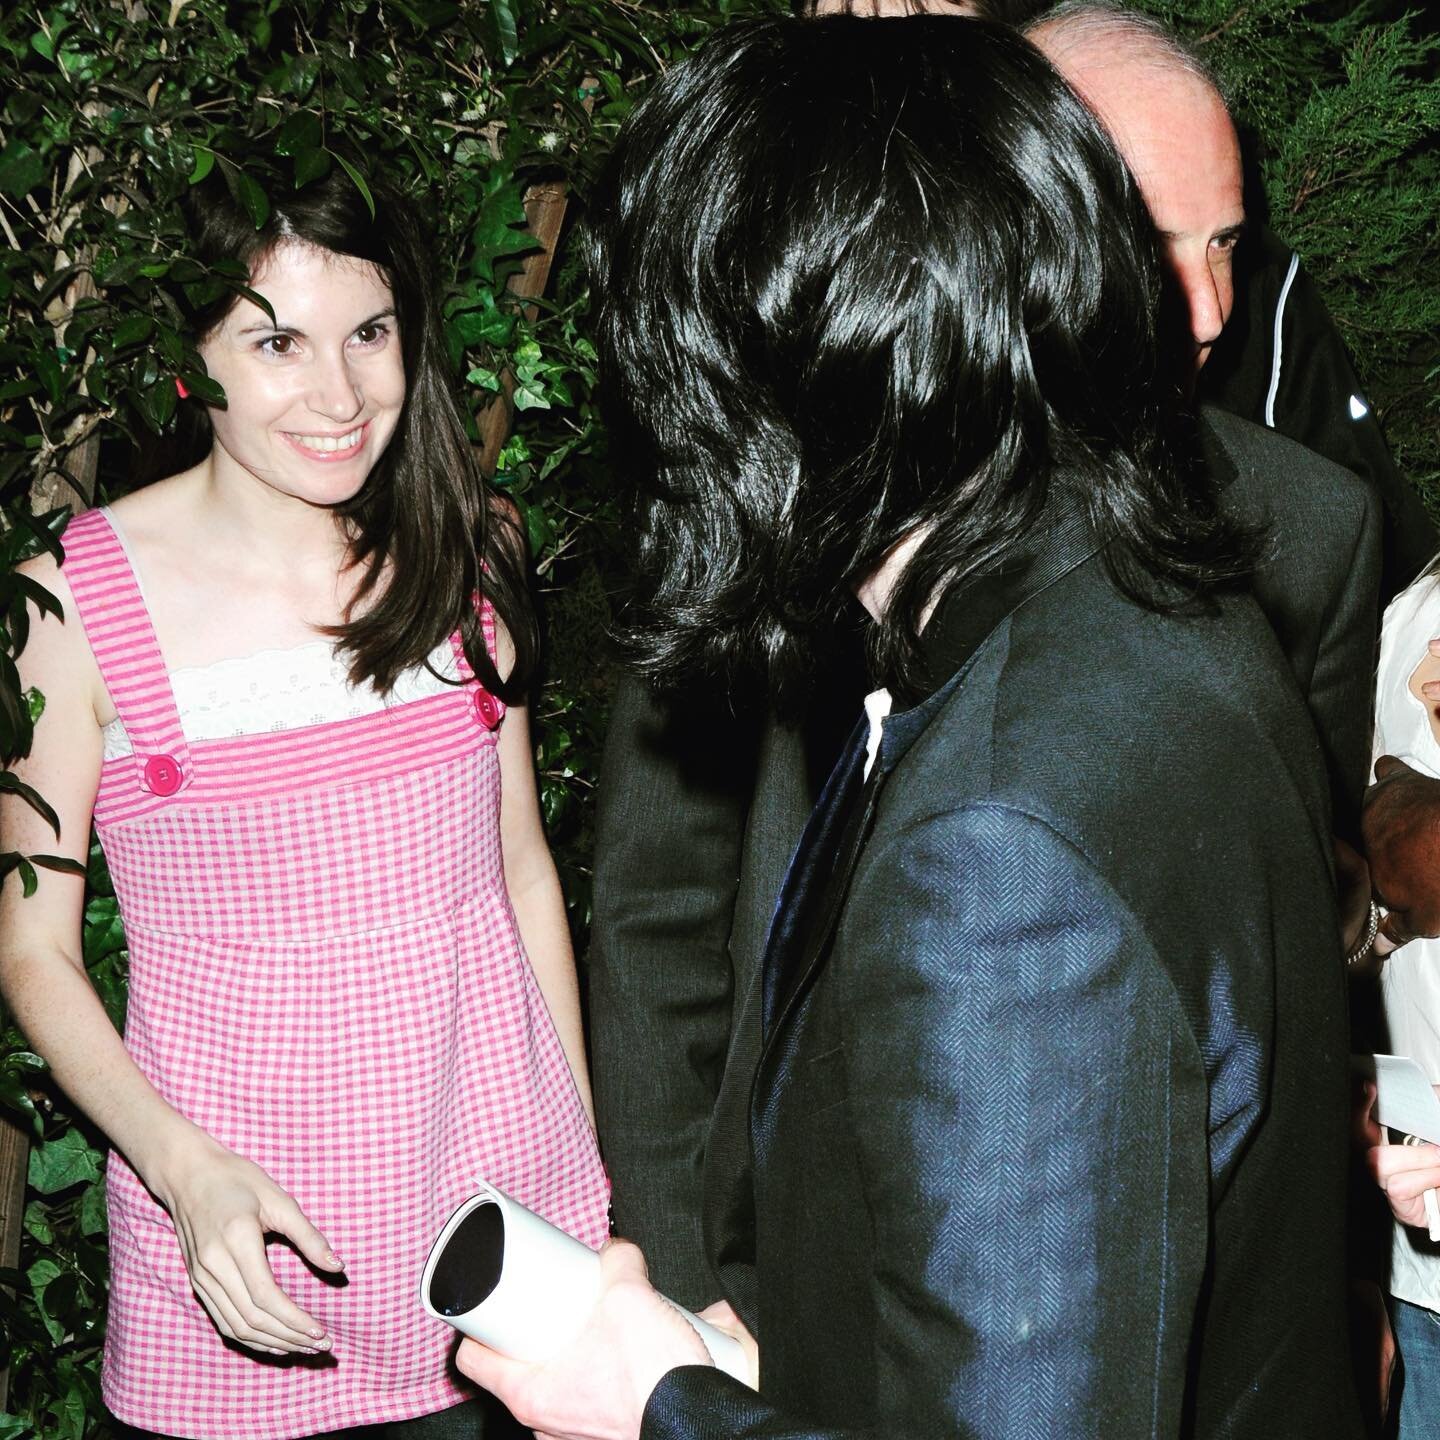 A special moment: Michael taking to me, outside the Hotel Bel-Air in October 2008. I remember what he was saying to me in that moment, telling me repeatedly, in his soft, melodious voice, &ldquo;You&rsquo;re so sweet,&rdquo; and the love shining in h